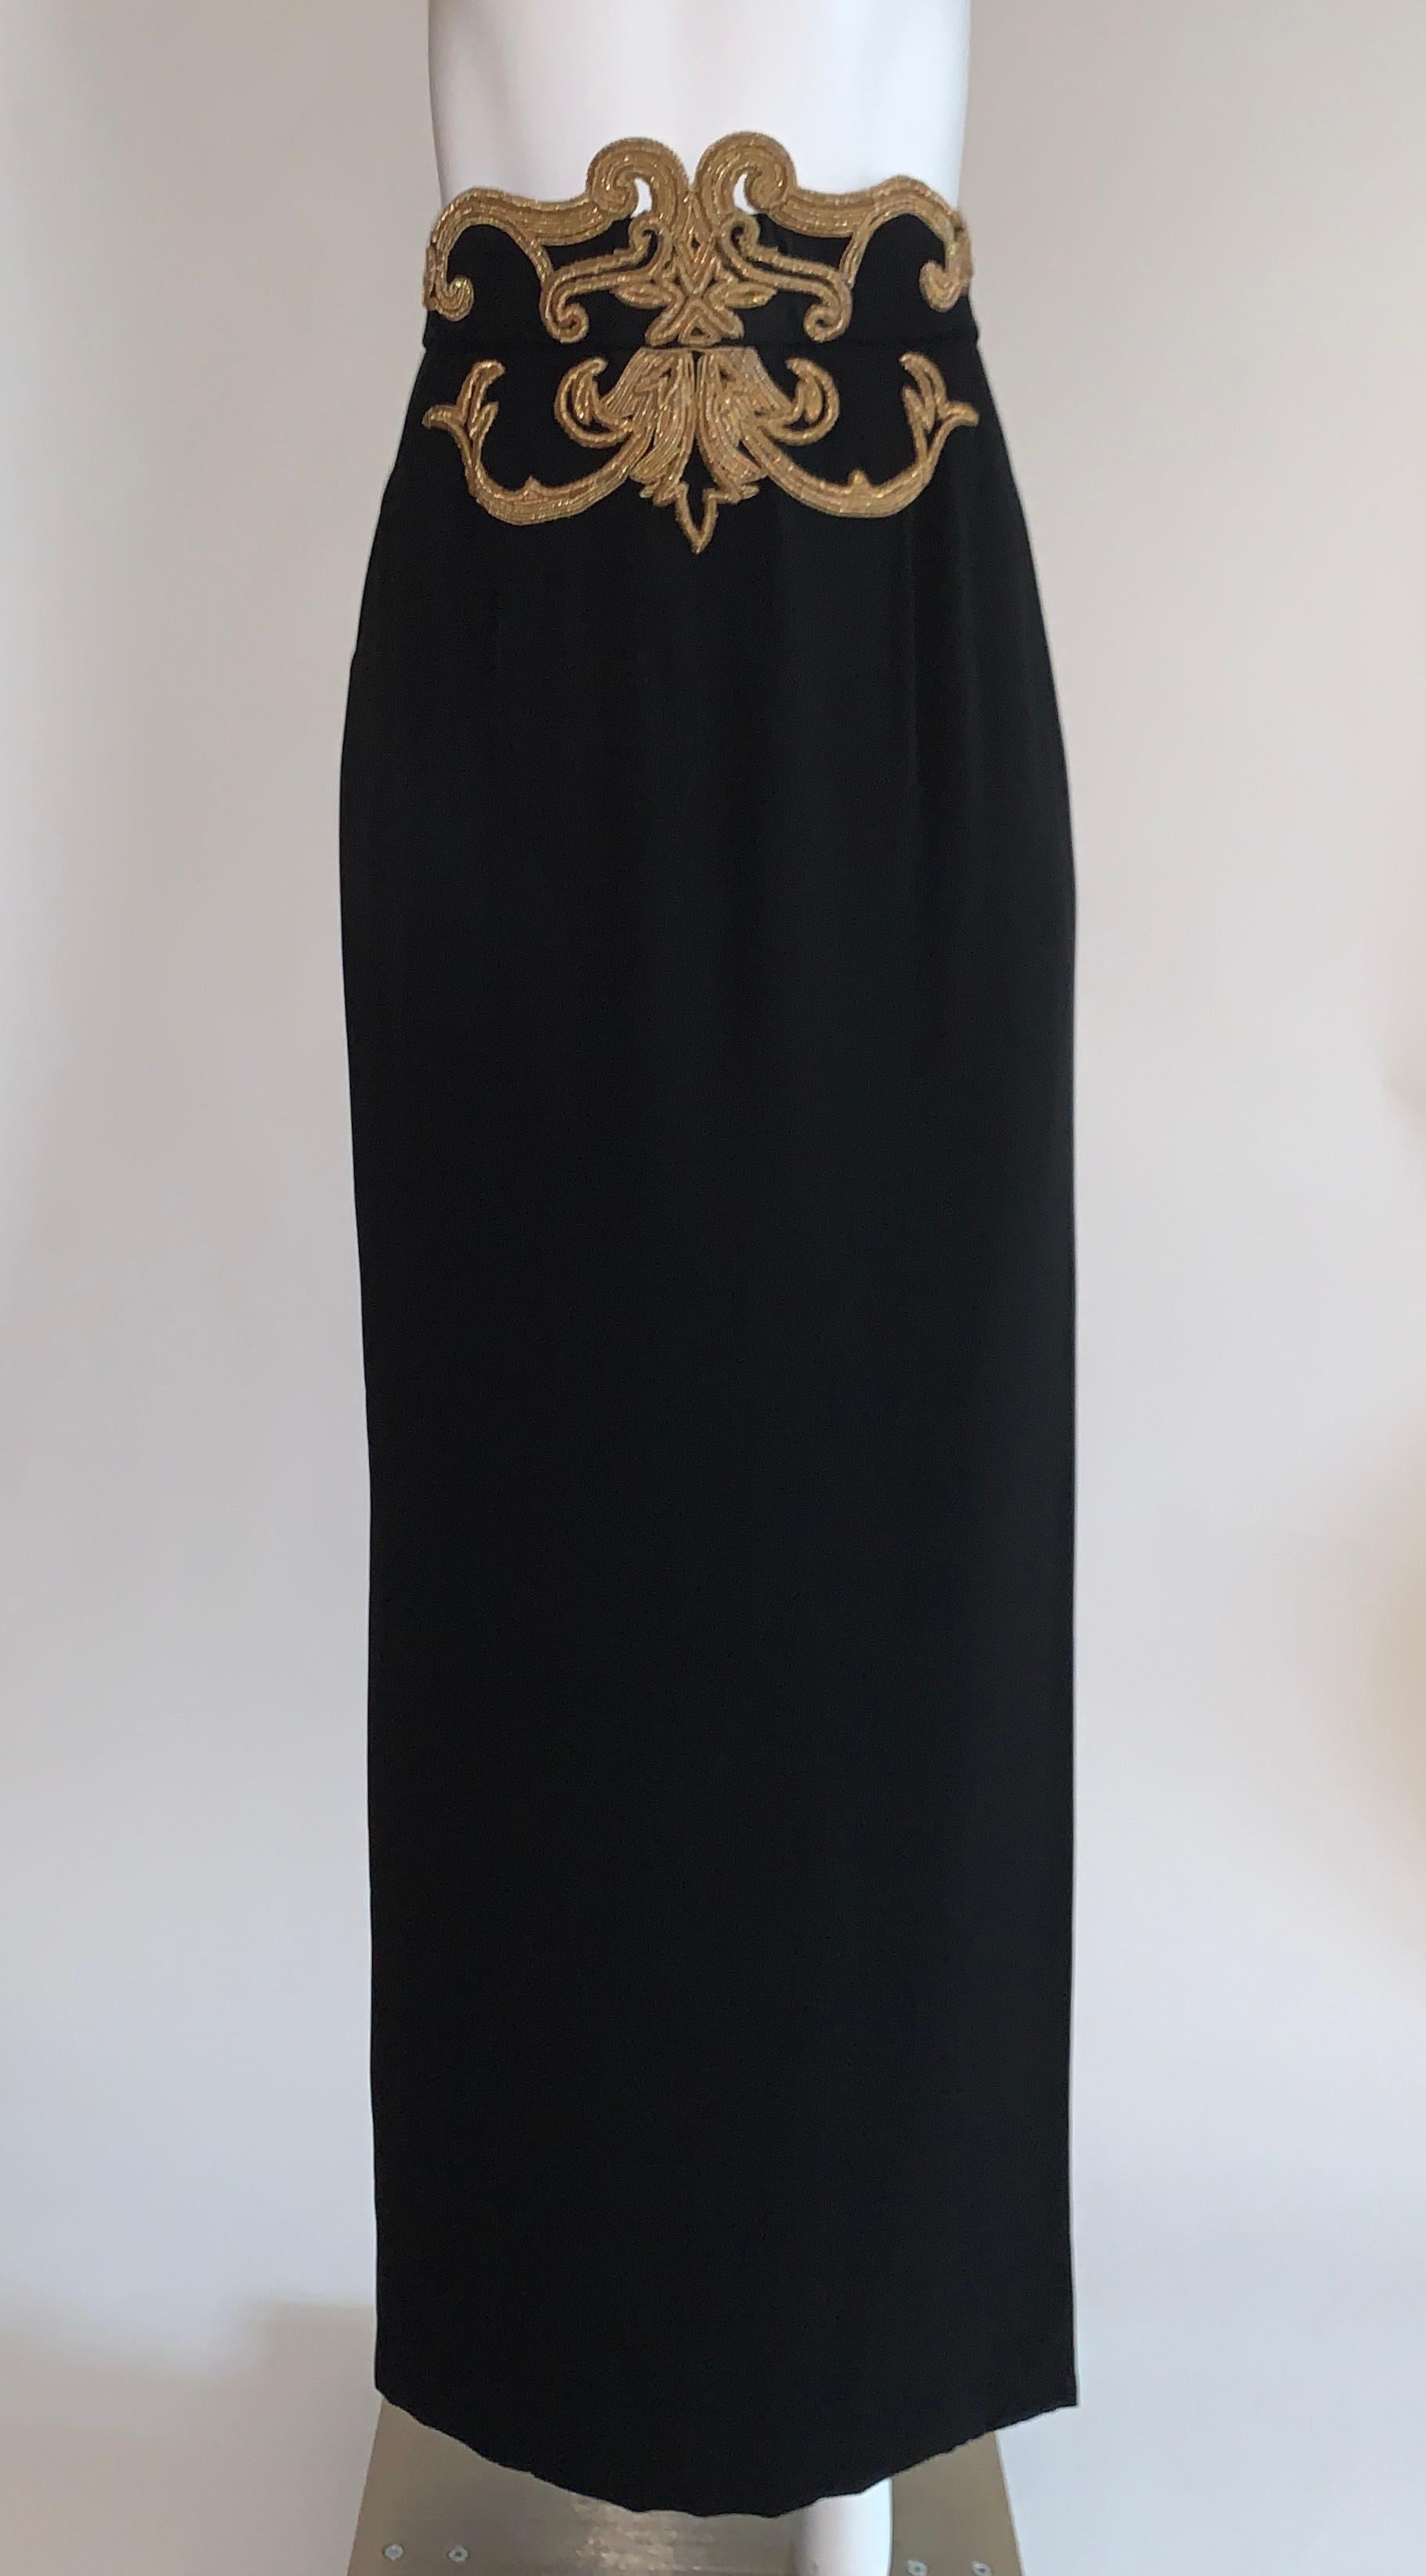 Vintage Christian Dior Boutique black straight maxi skirt with gold embellished detail at waist. Swirl detail consists of thick metallic wrapped threads and small beads. Long slit at side front allows movement. Back zip with two hooks.

No content